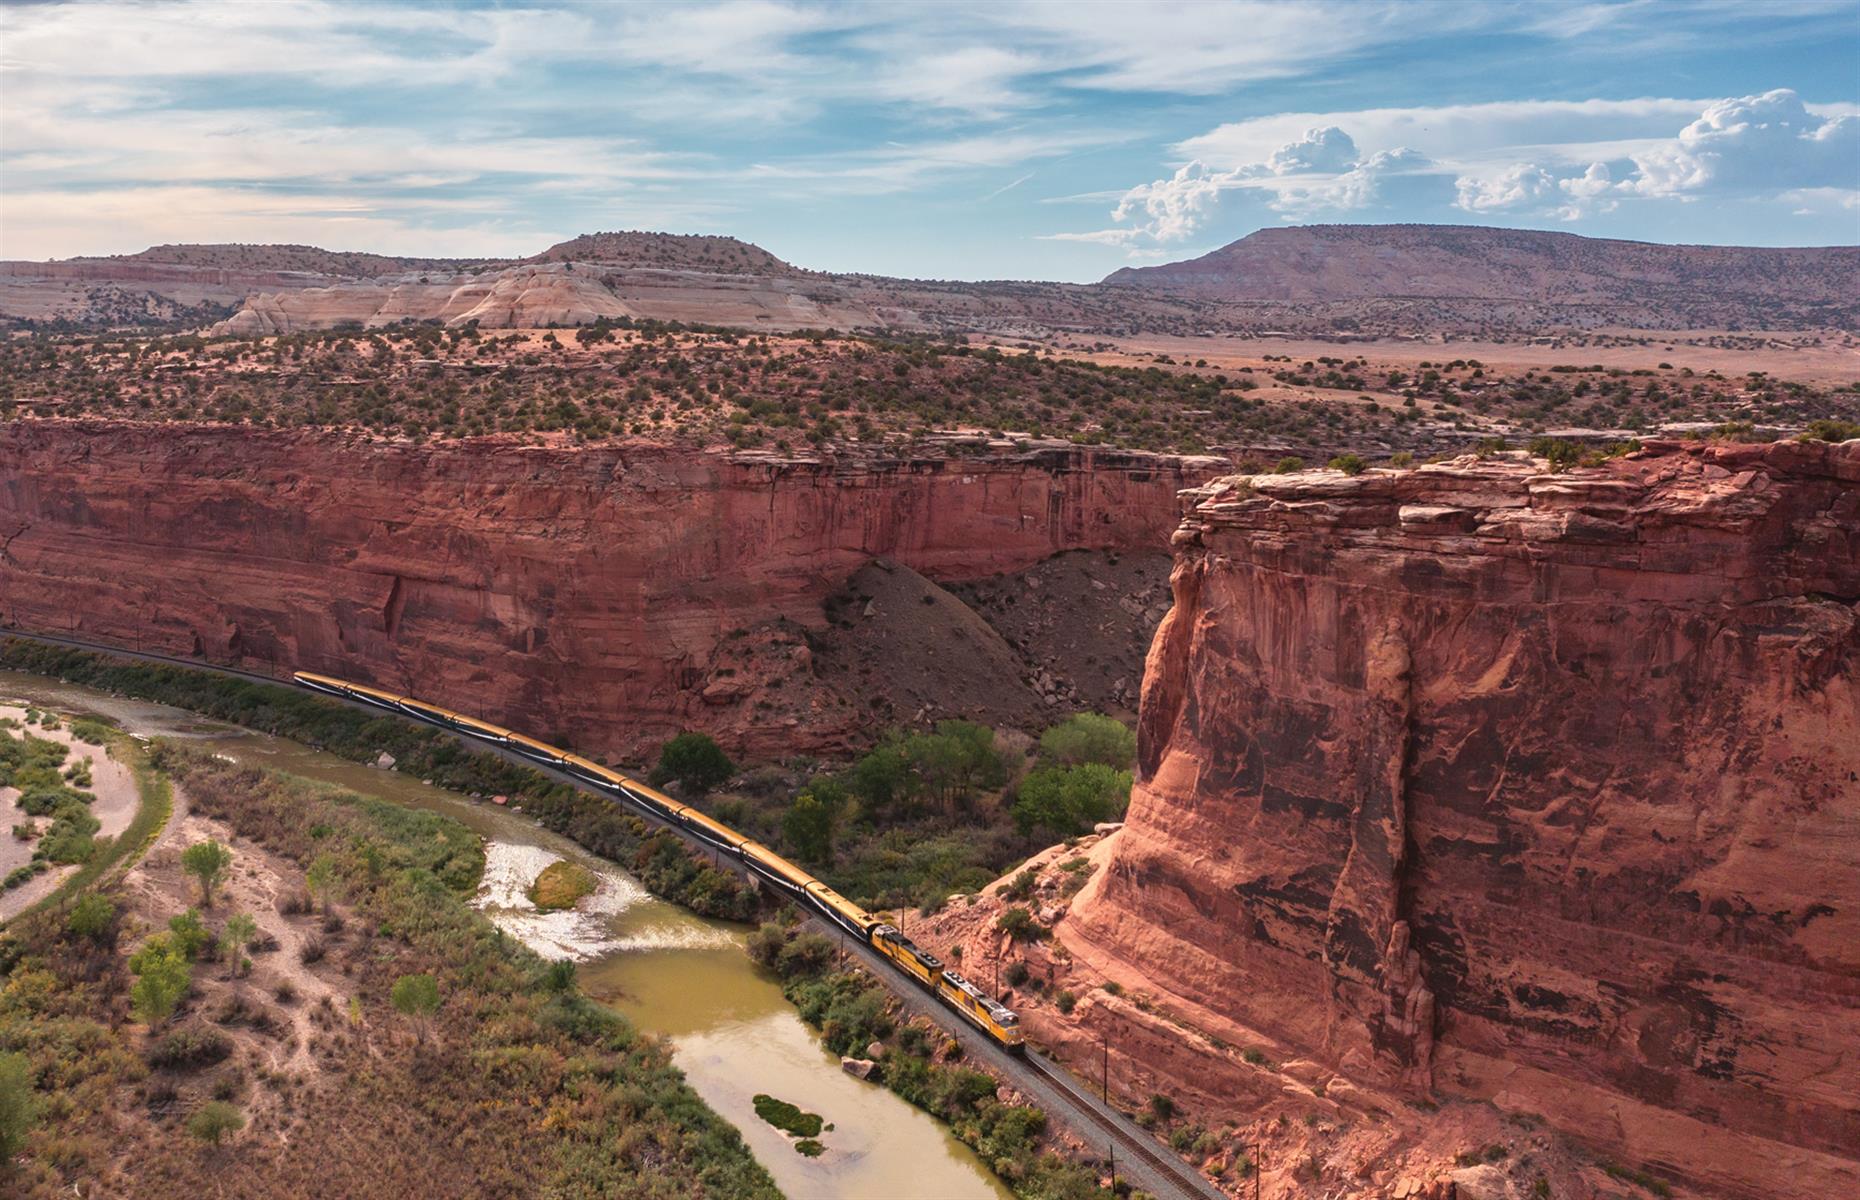 <p>Launched in August 2021, the Rocky Mountaineer’s exciting new route takes passengers on a two-day excursion between Denver, Colorado and Moab, Utah, including an overnight stay in Glenwood Springs, Colorado. <a href="https://www.rockymountaineer.com/train-routes/rockies-red-rocks">The Rockies to the Red Rocks journey</a> is an extravagant one and doesn’t come cheap, starting at $1,395 for a one-way trip. All packages include gourmet meals, access to opulent lounge carriages and accommodation in Moab, Glenwood Springs and Denver. </p>  <p><a href="https://www.facebook.com/loveexploringUK?utm_source=msn&utm_medium=social&utm_campaign=front"><strong>Love this? Follow us on Facebook for more travel inspiration</strong></a></p>